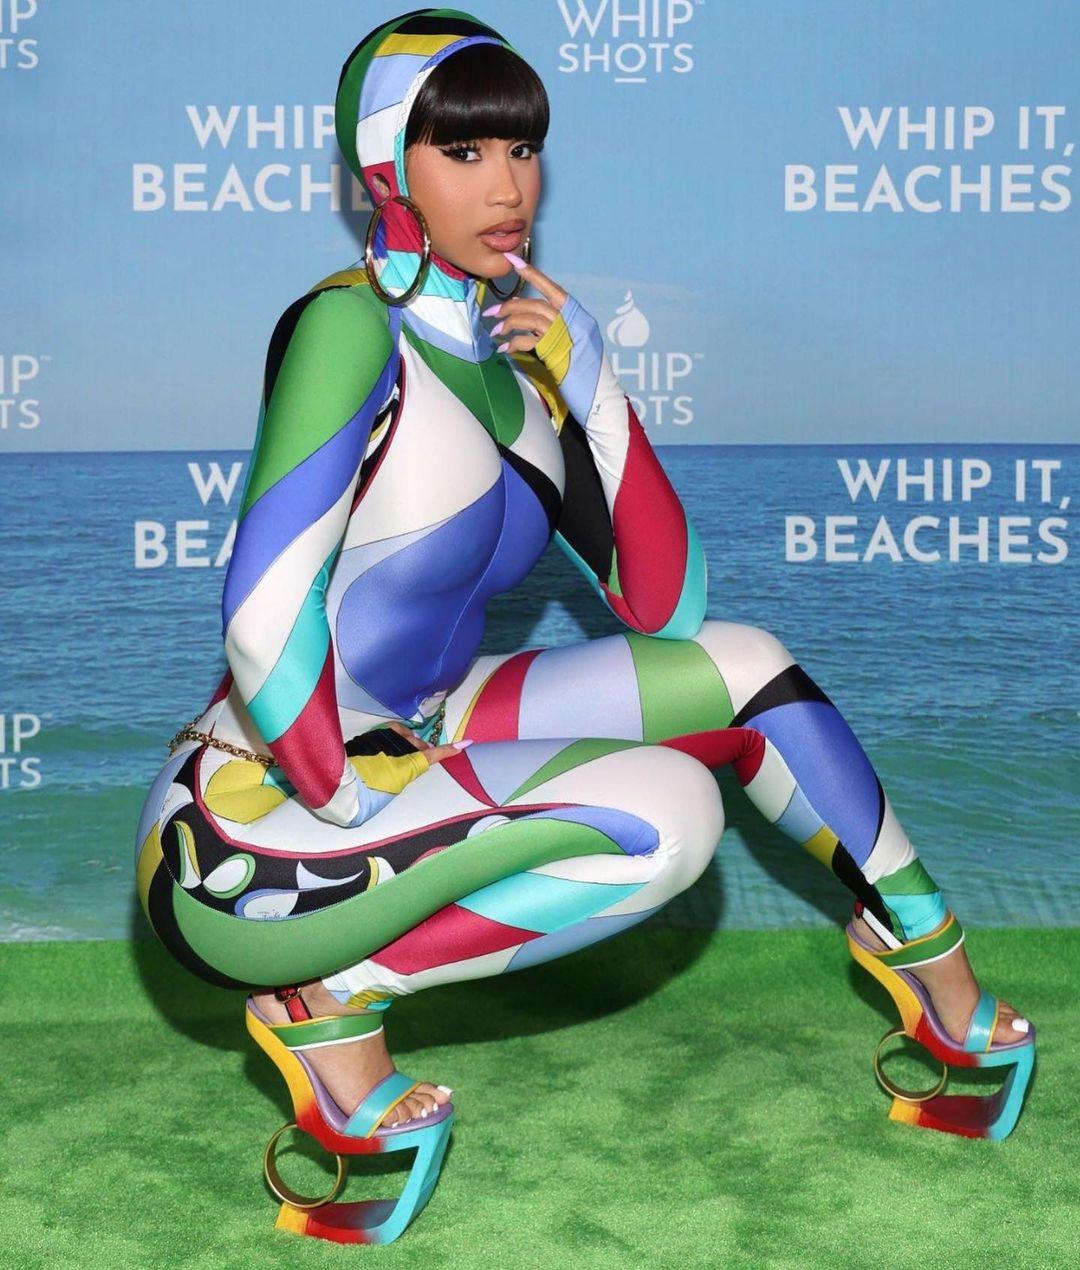 Cardi B turns heads in daring colorful outfit